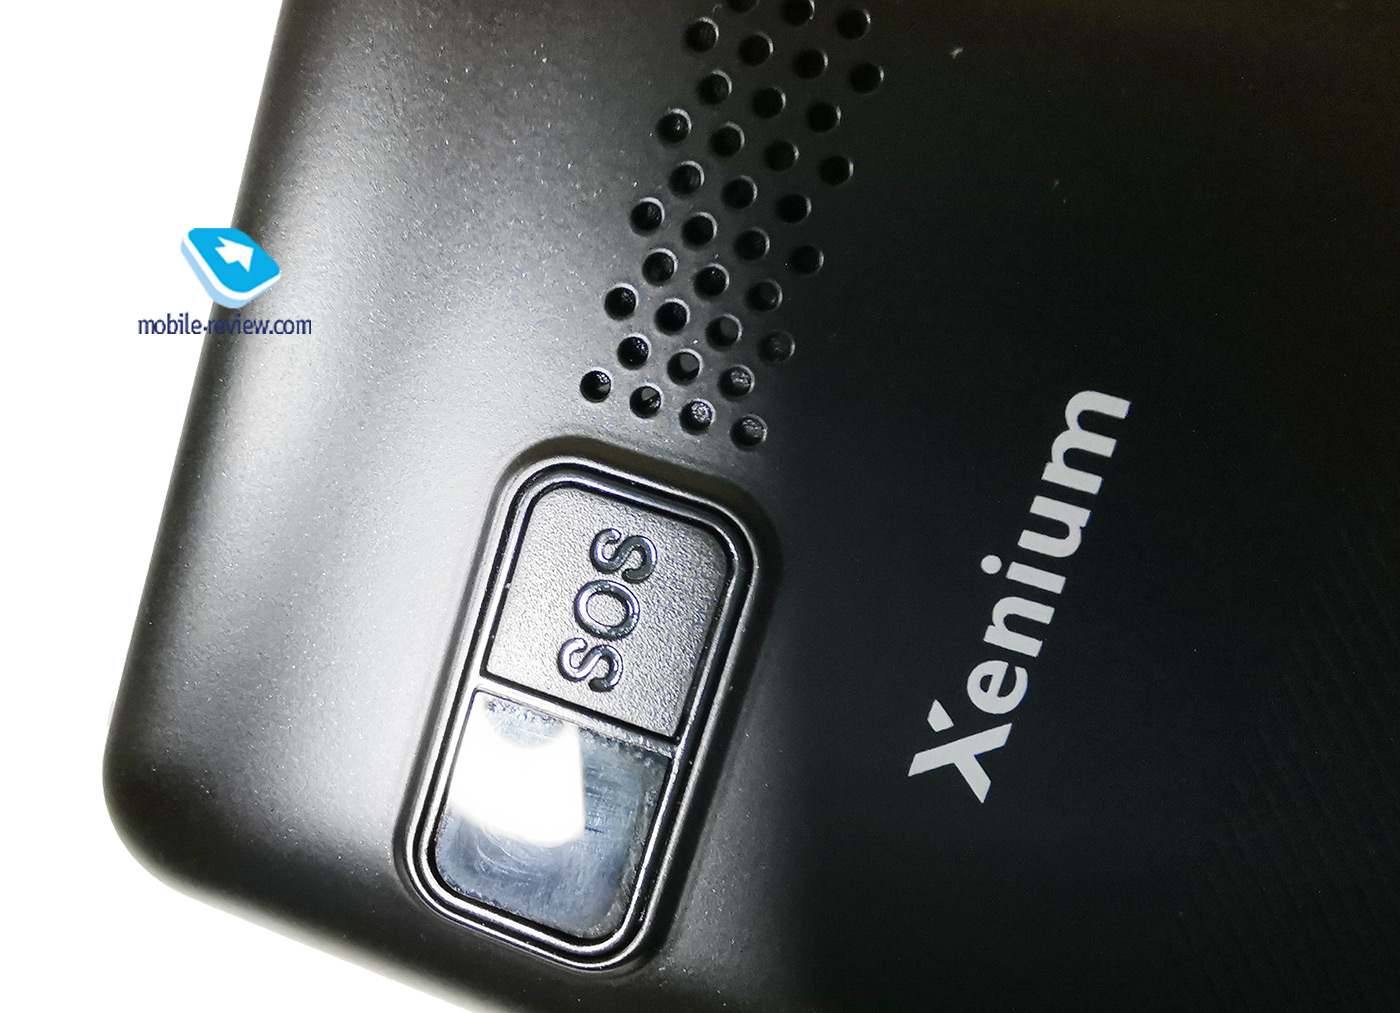 Review of push-button phones Philips Xenium E117 and Xenium E207